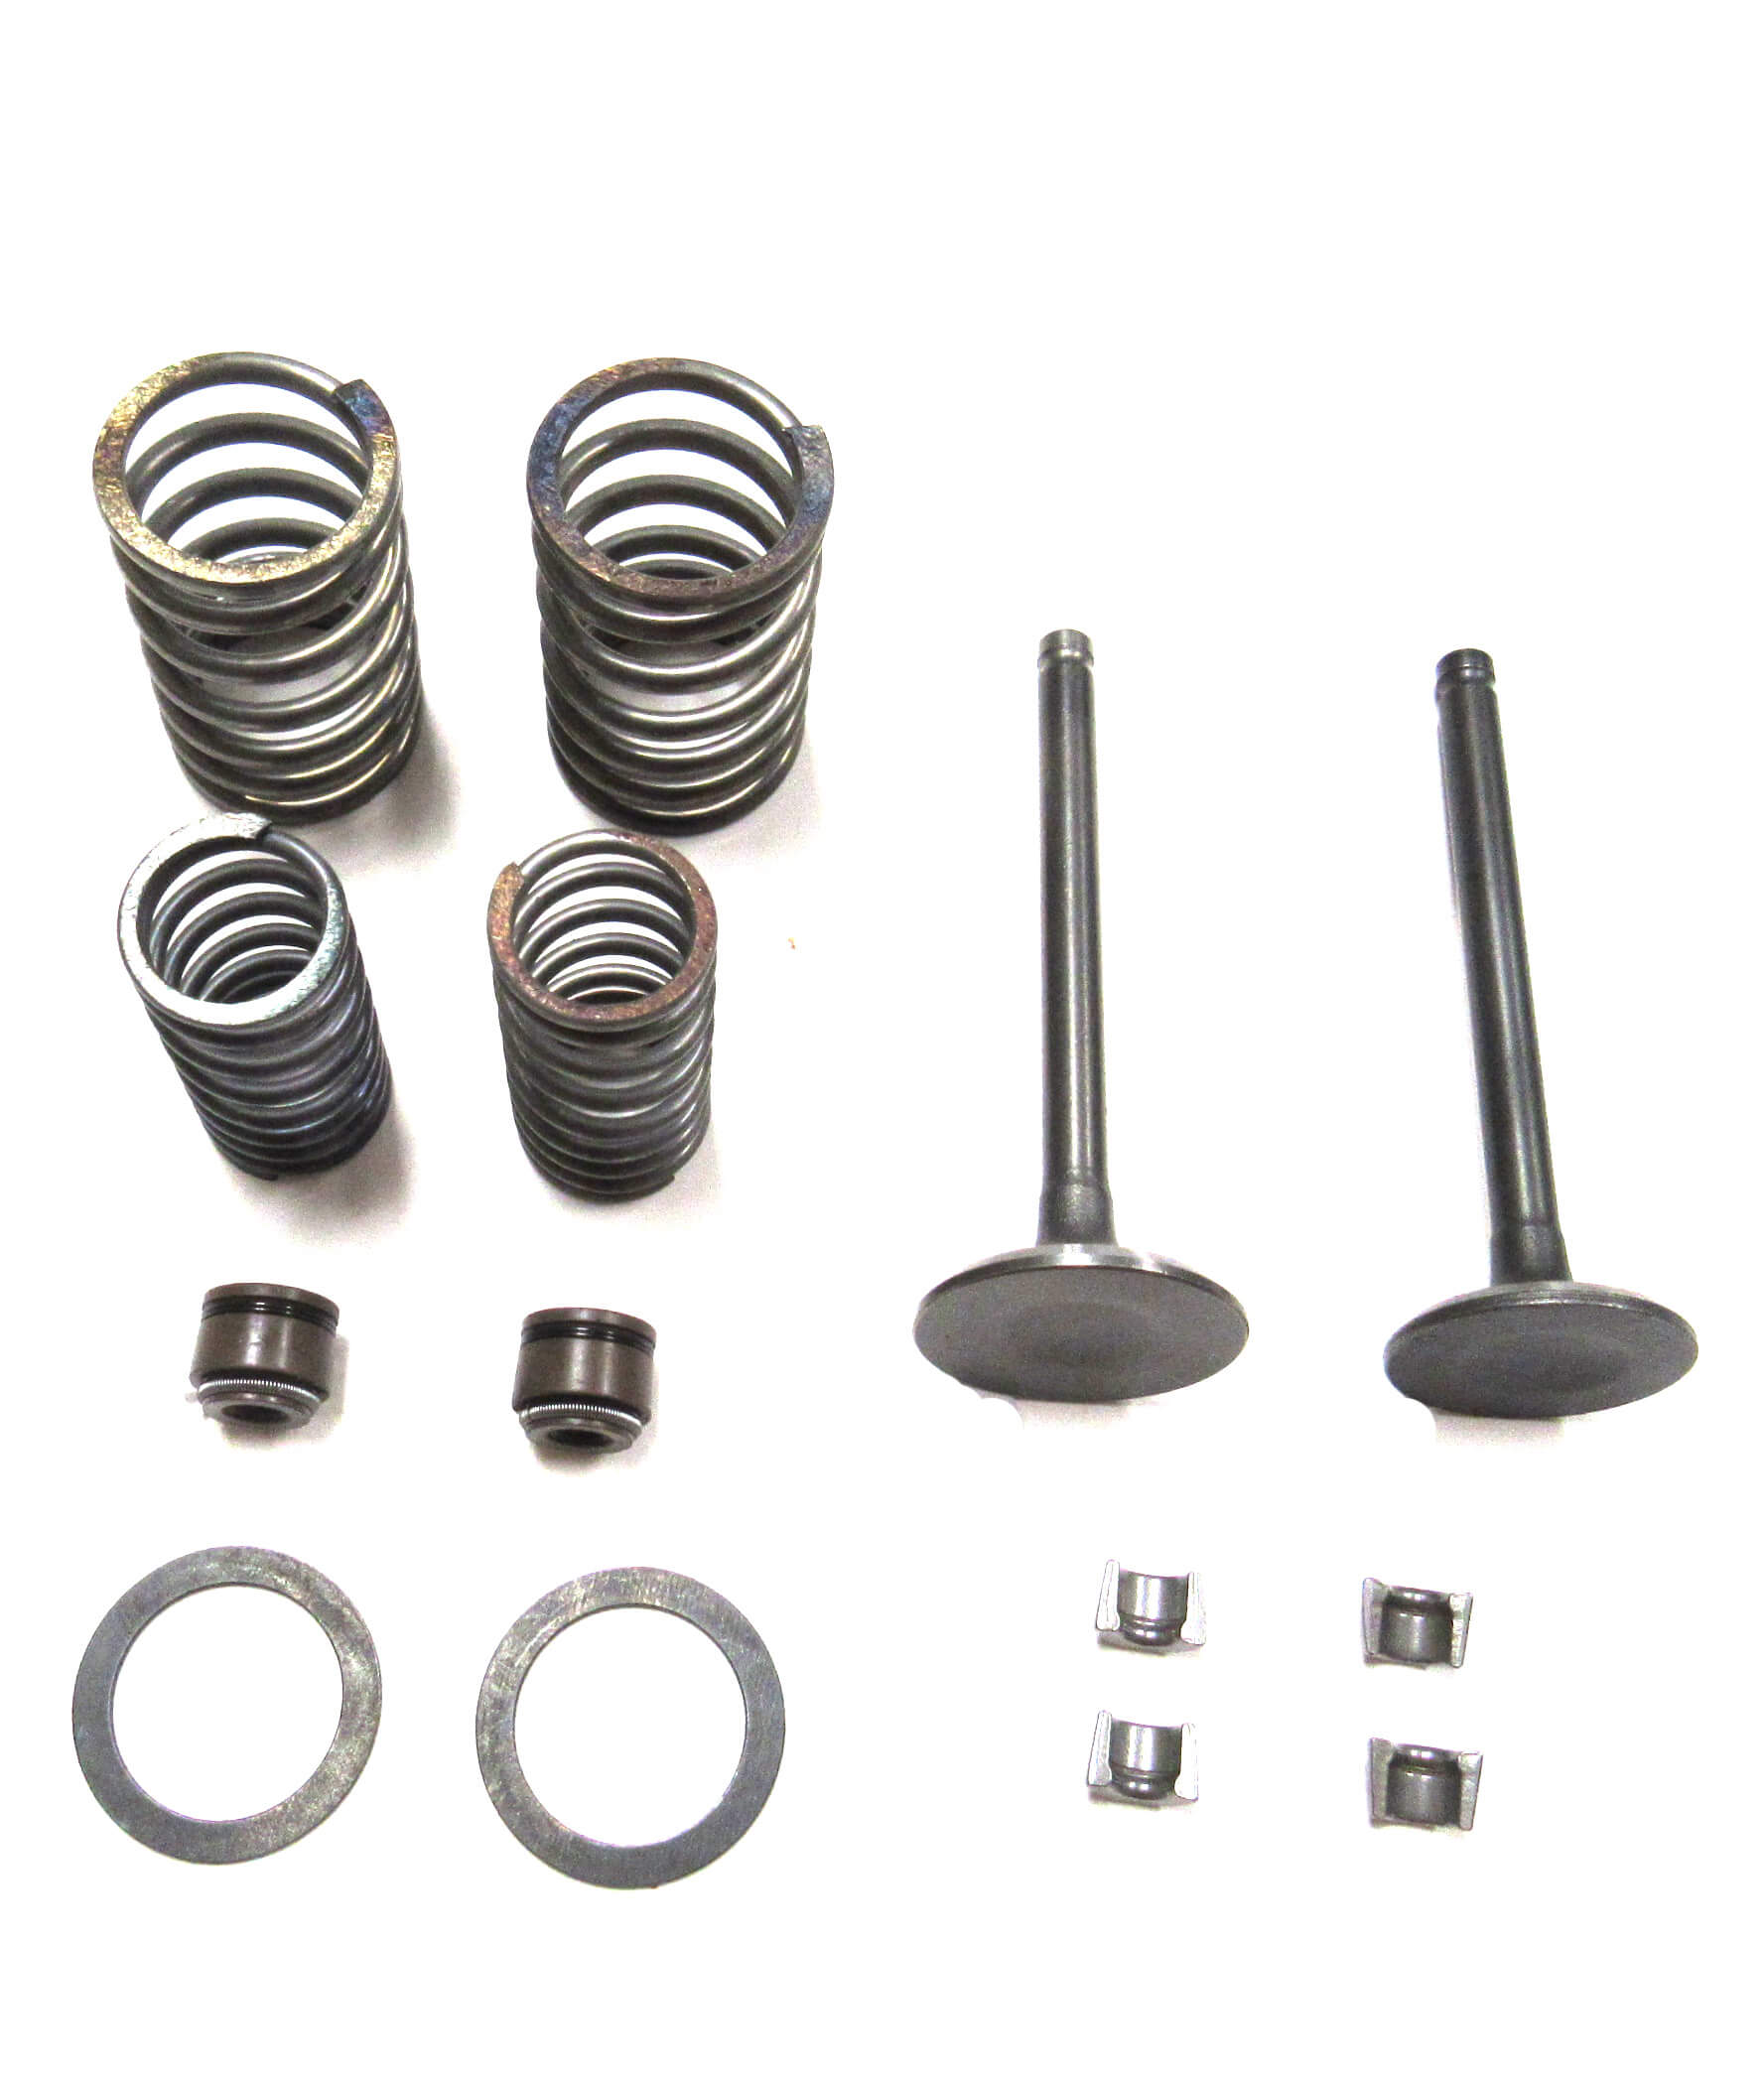 GY6-150 Valve Set Includes 2 Valves, 2 Springs, 2 Seals & retainer clips